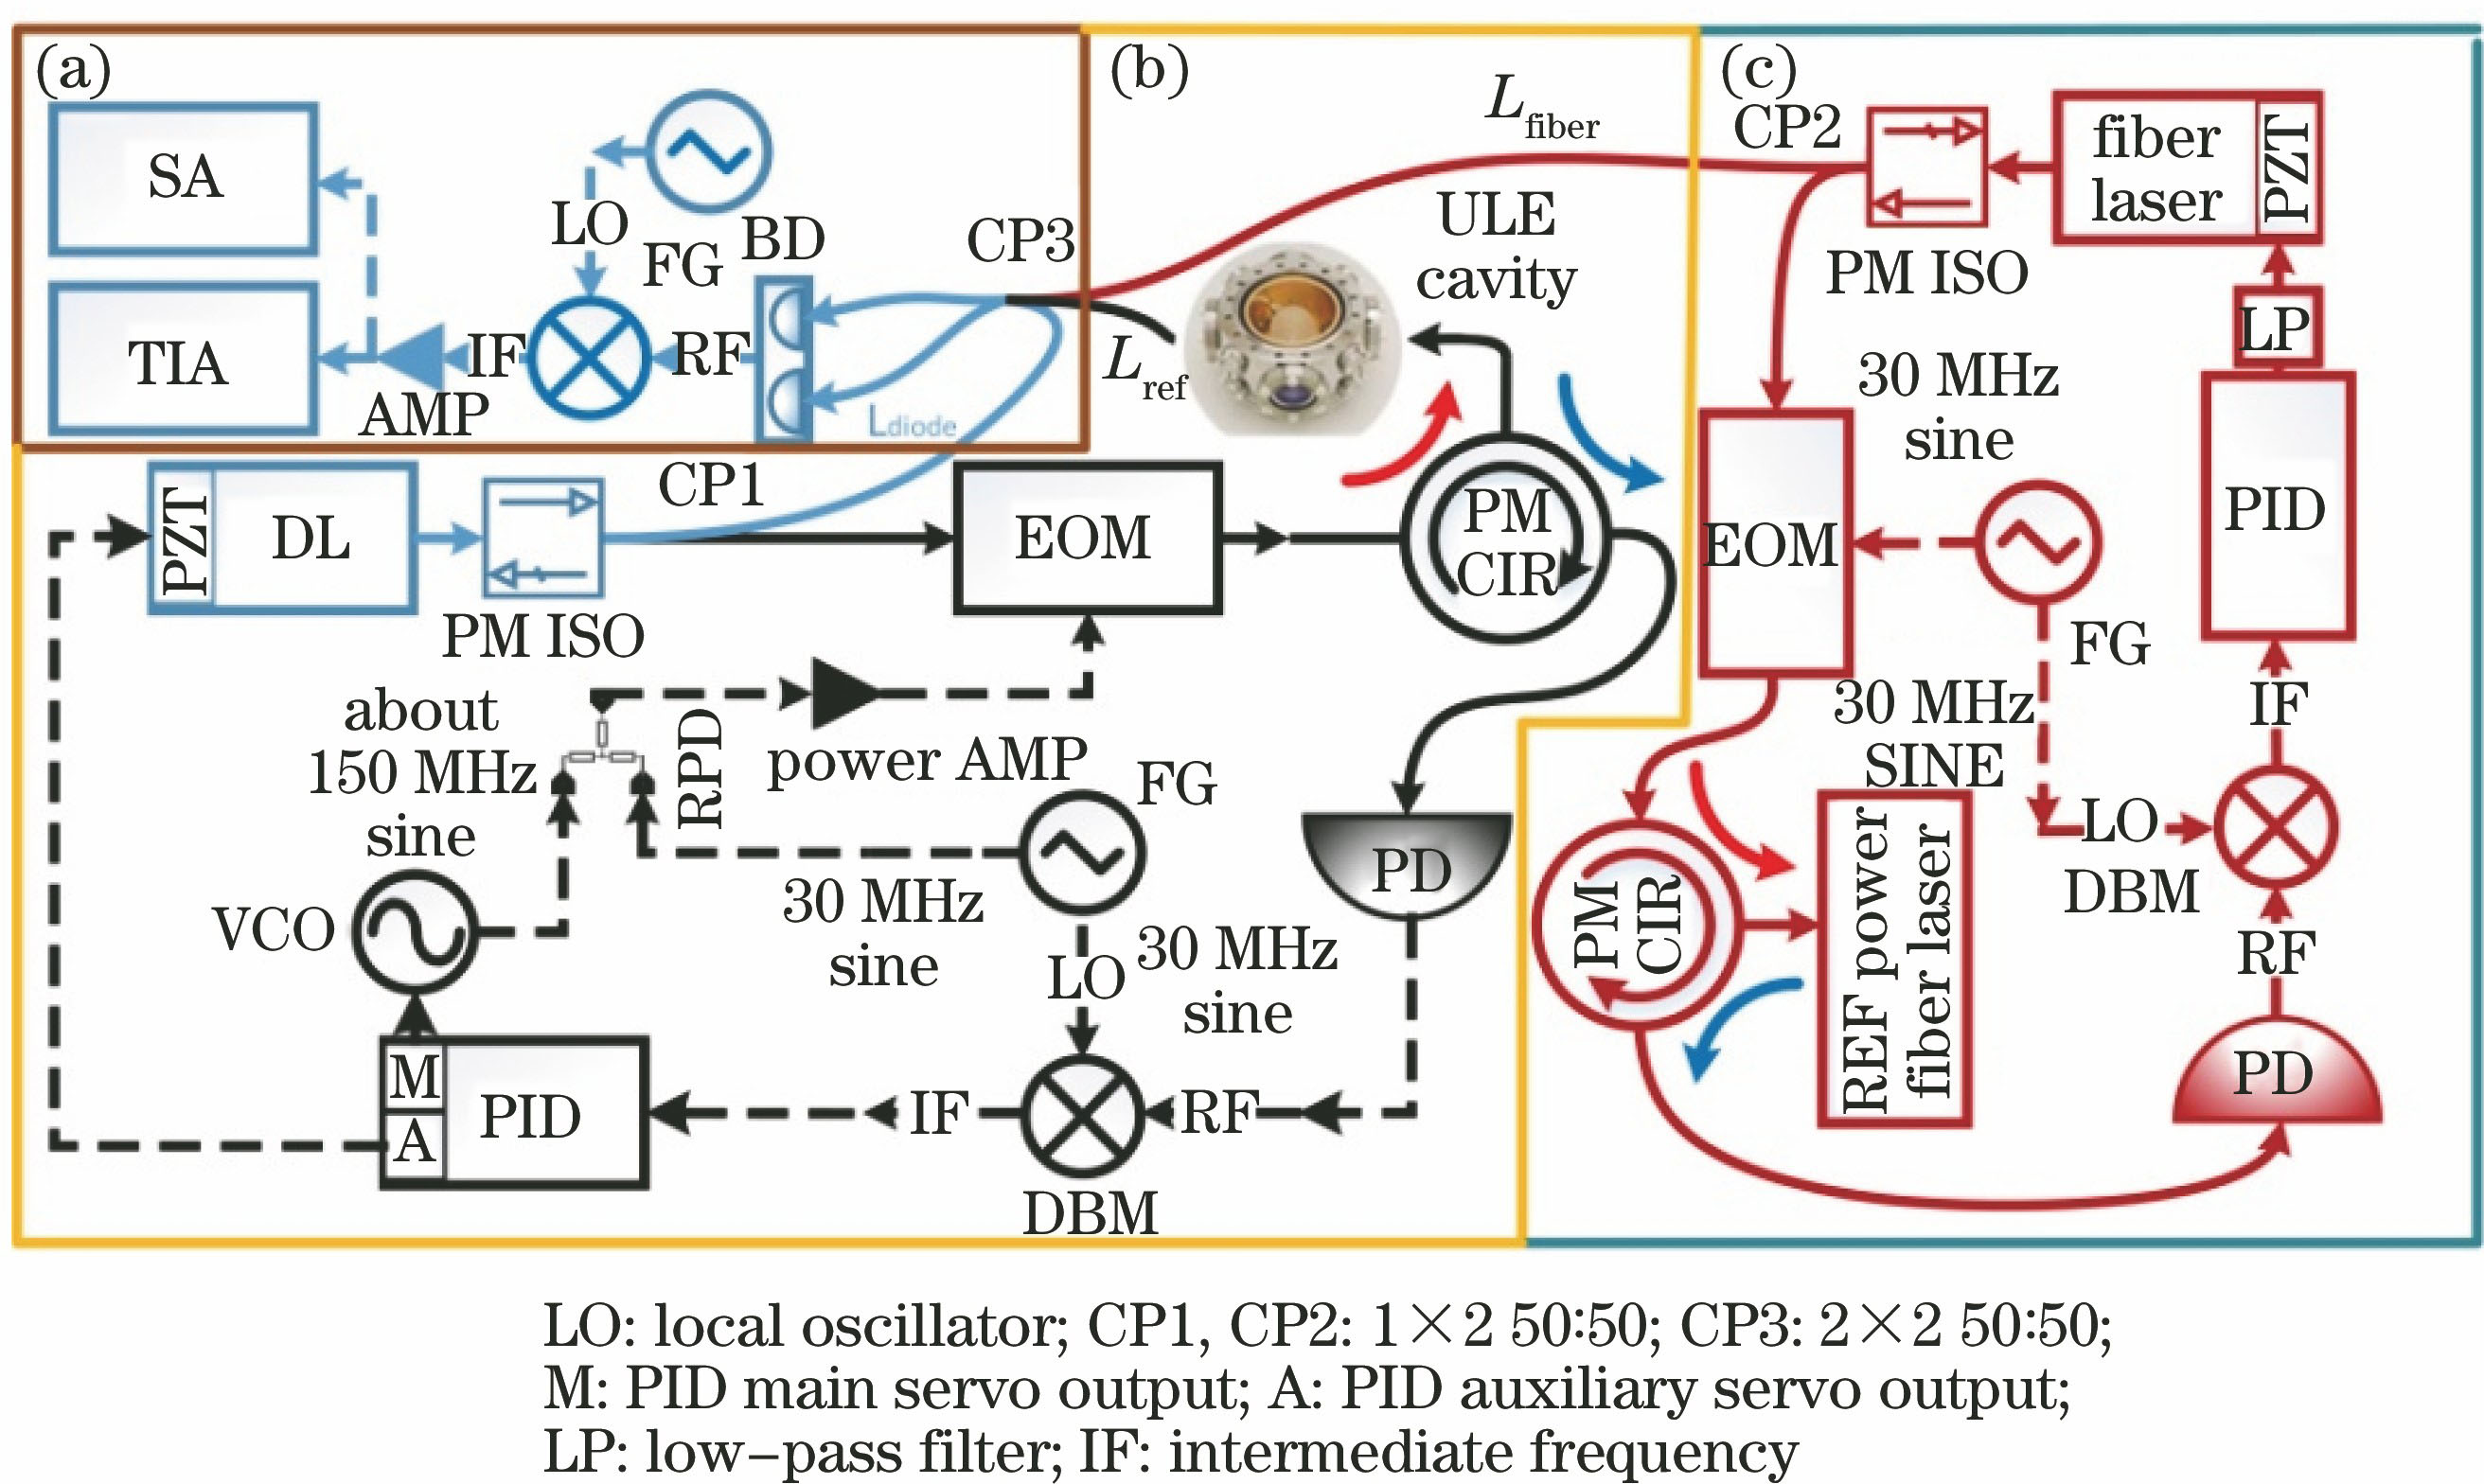 Experiment setup of linewidth measurement at Fourier limit based on time-resolved method. (a) Experimental device of beat-frequency measurement; (b) optical path for producing coherent light field with linewidth of 10 Hz; (c) optical path of fiber laser